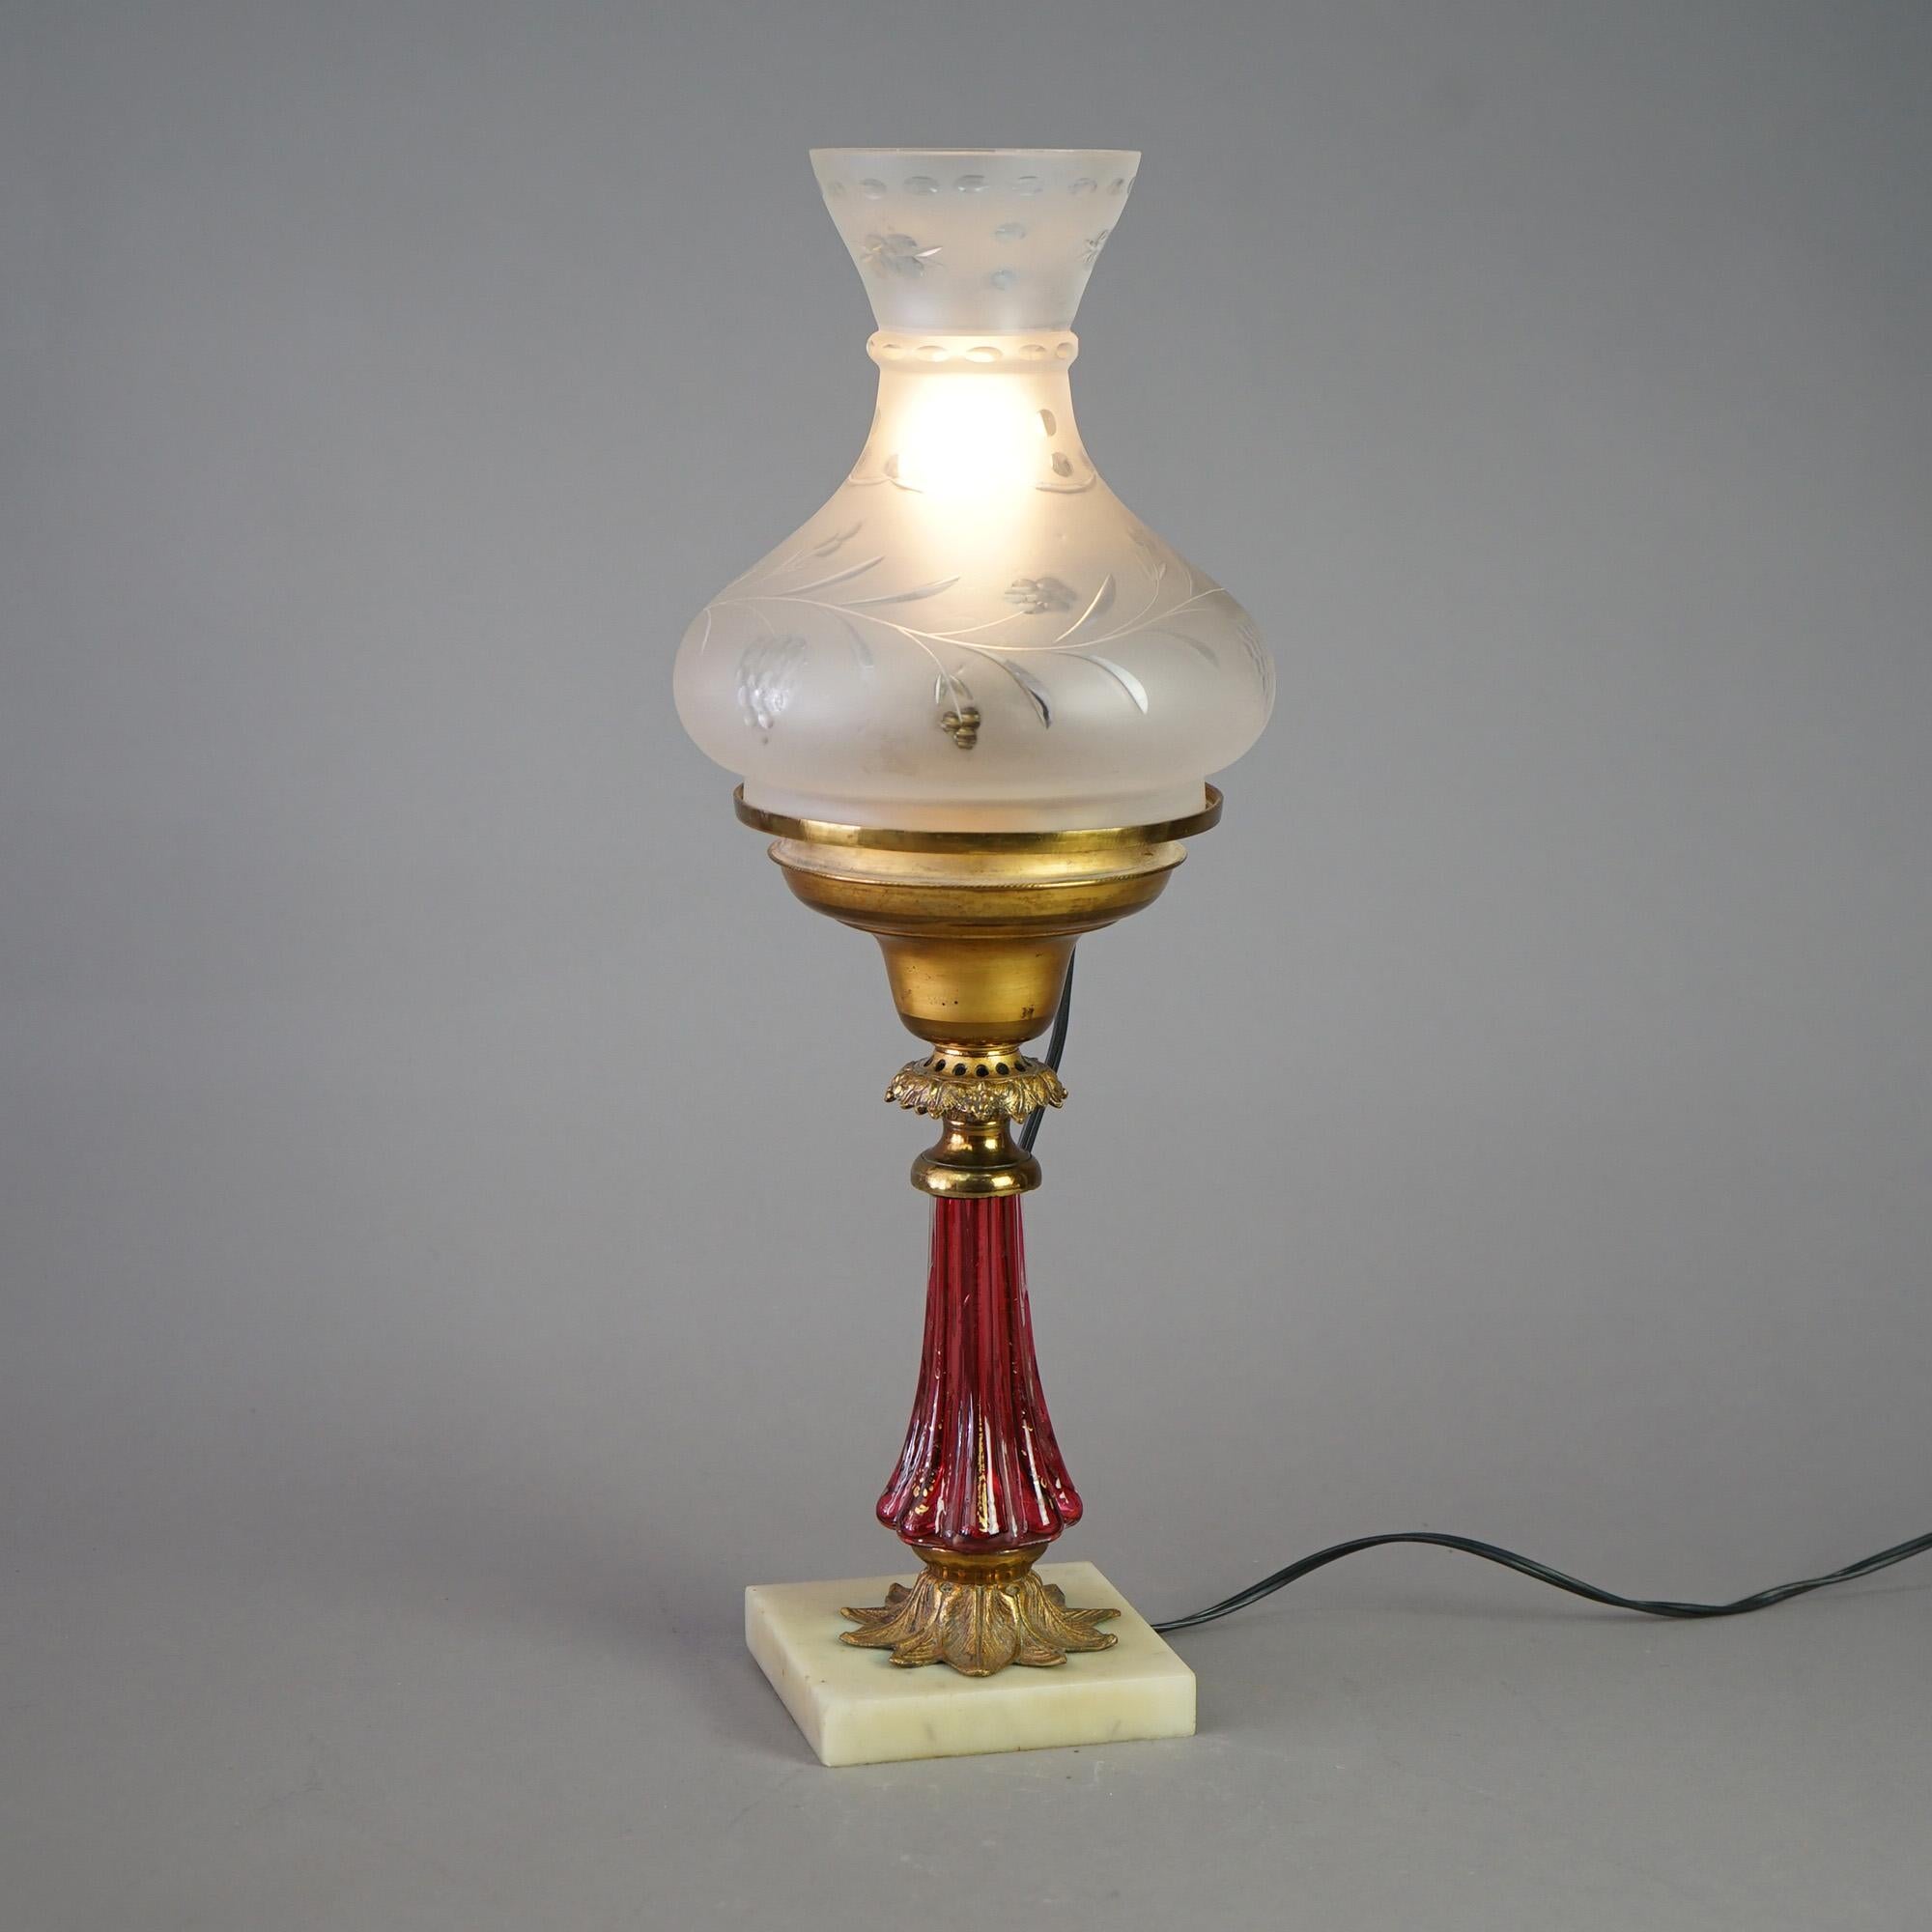 Cornelius School Gilt Brass & Cranberry Glass Solar Lamp & Cut Back Shade C1850 In Good Condition For Sale In Big Flats, NY